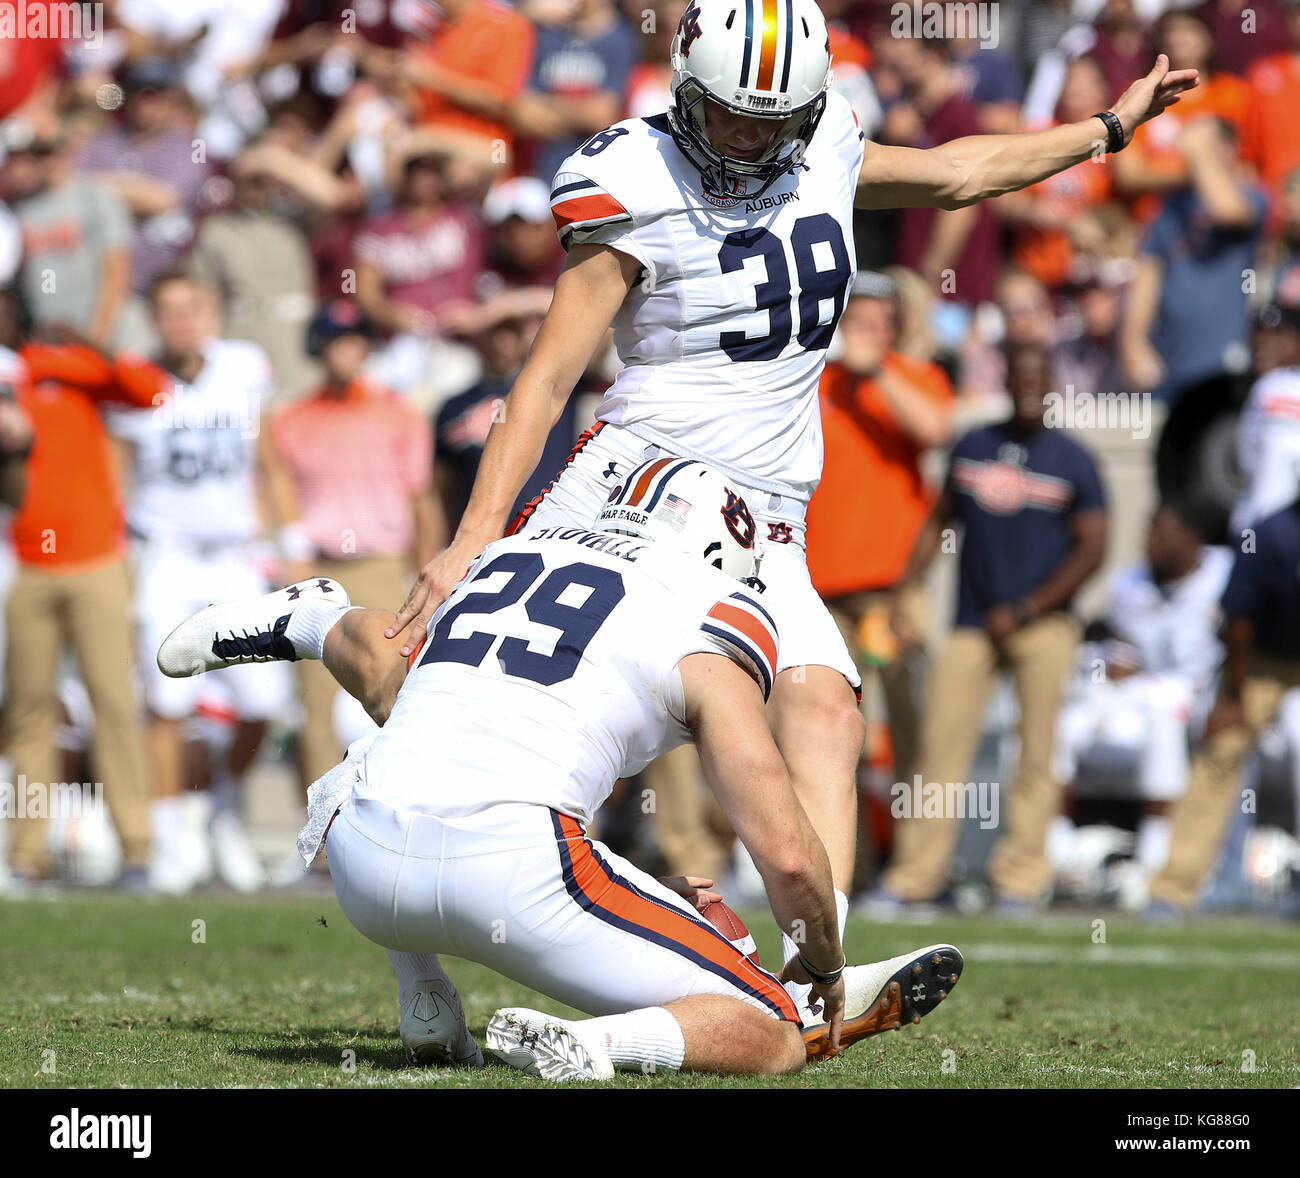 November 4, 2017: Auburn Tigers place kicker Daniel Carlson (38) kicks an extra point in the third quarter during the NCAA football game between the Auburn Tigers and the Texas A&M Aggies at Kyle Field in College Station, TX; John Glaser/CSM. Stock Photo